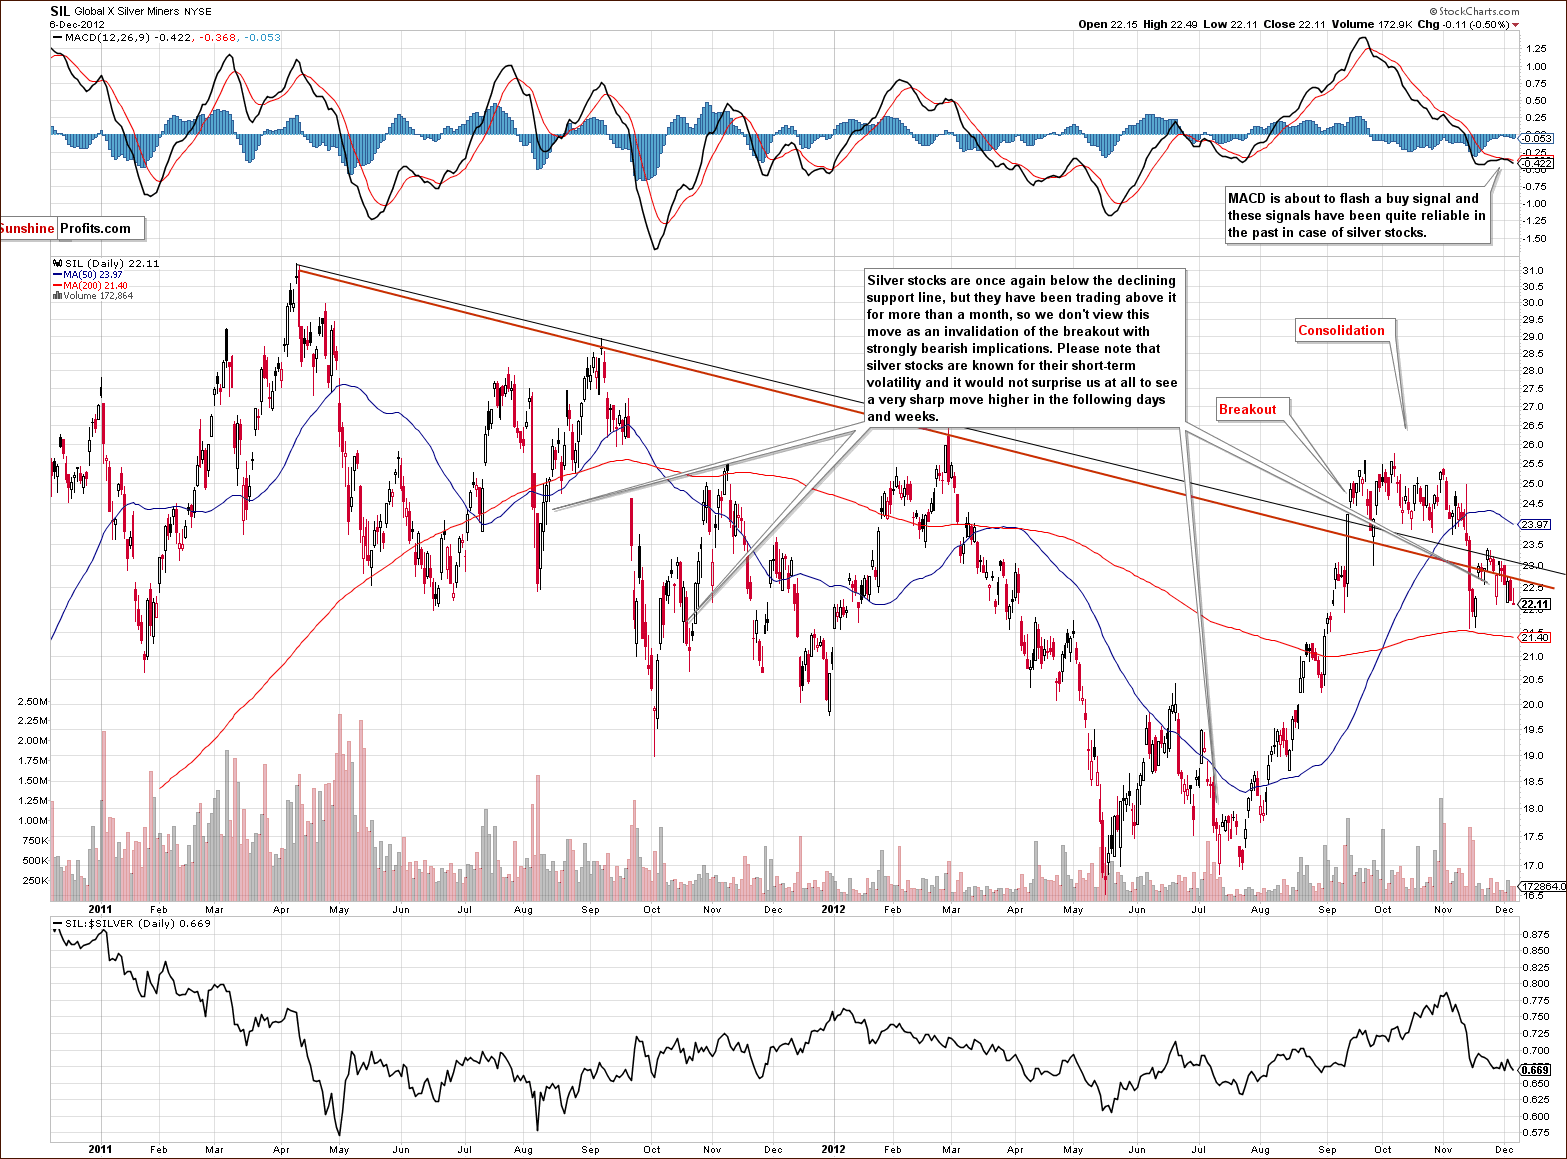 Global X Silver Miners - SIL long-term